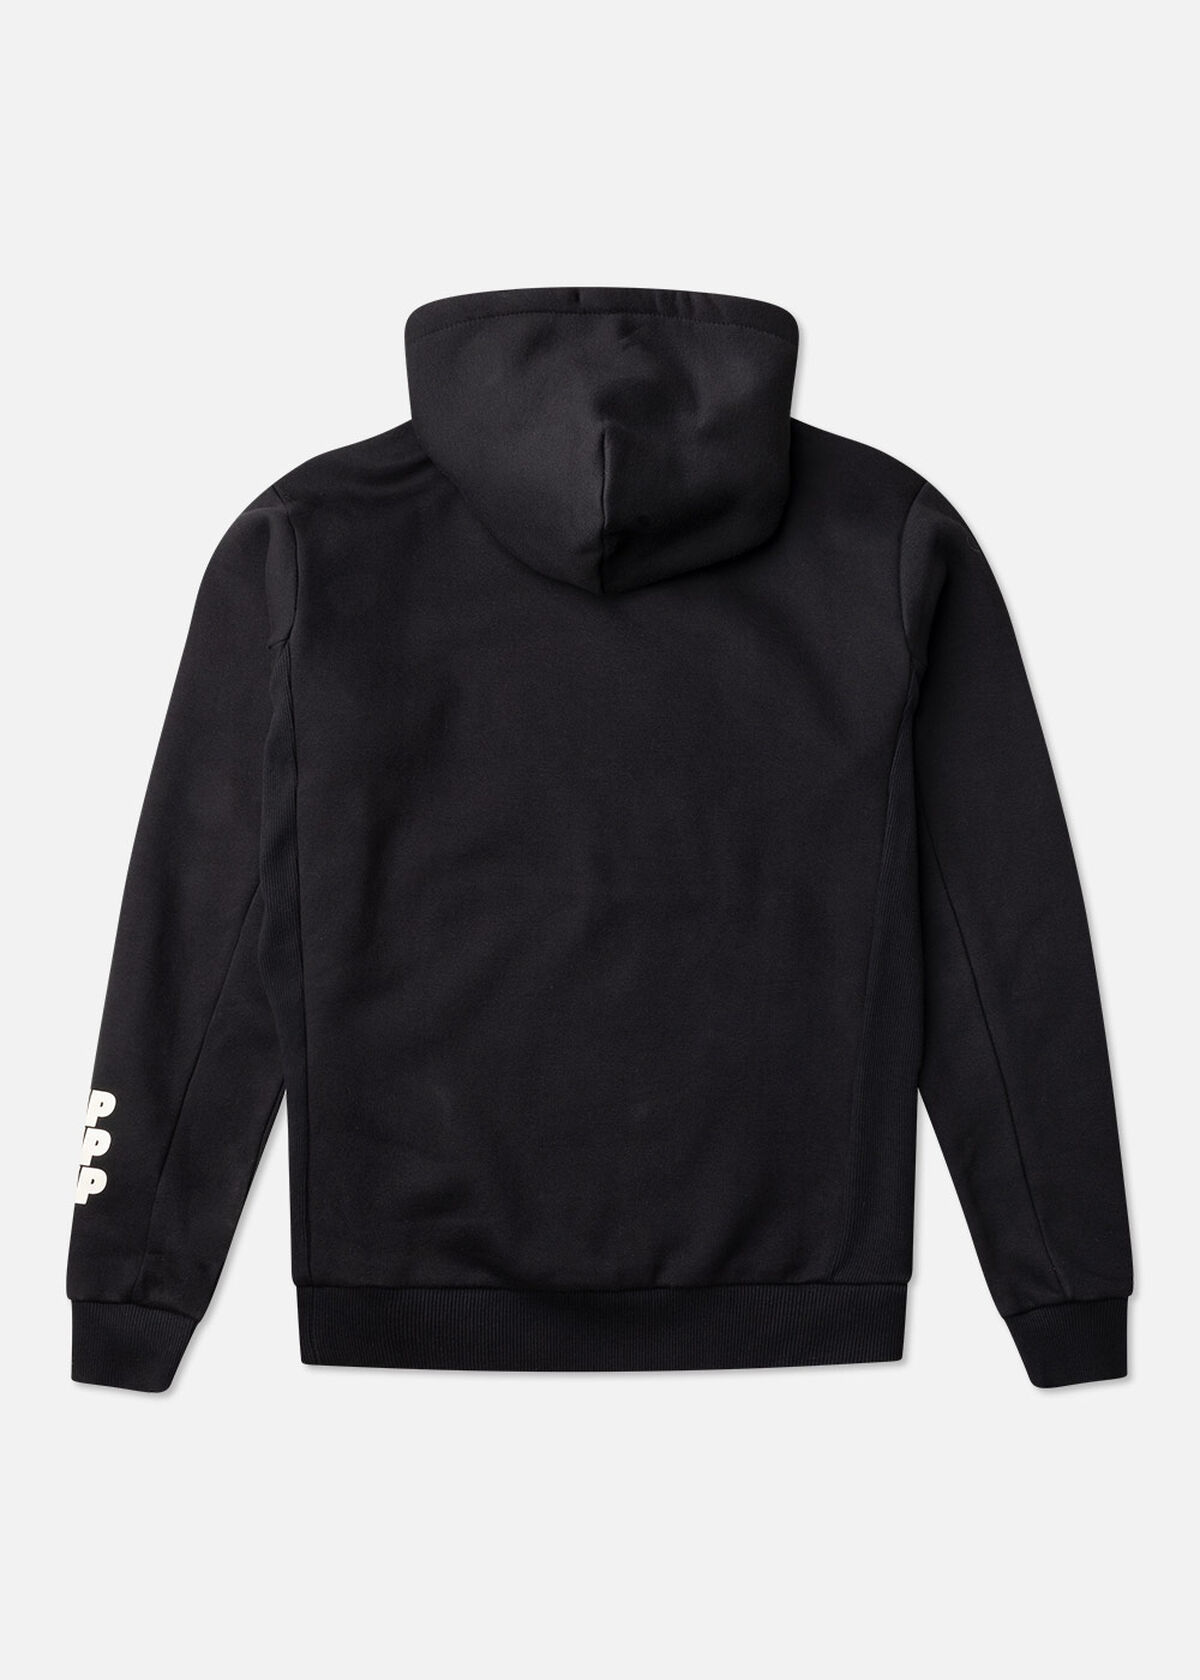 Off The Pitch - Sudadera Blanca para Hombre - Direction Oversized Hood